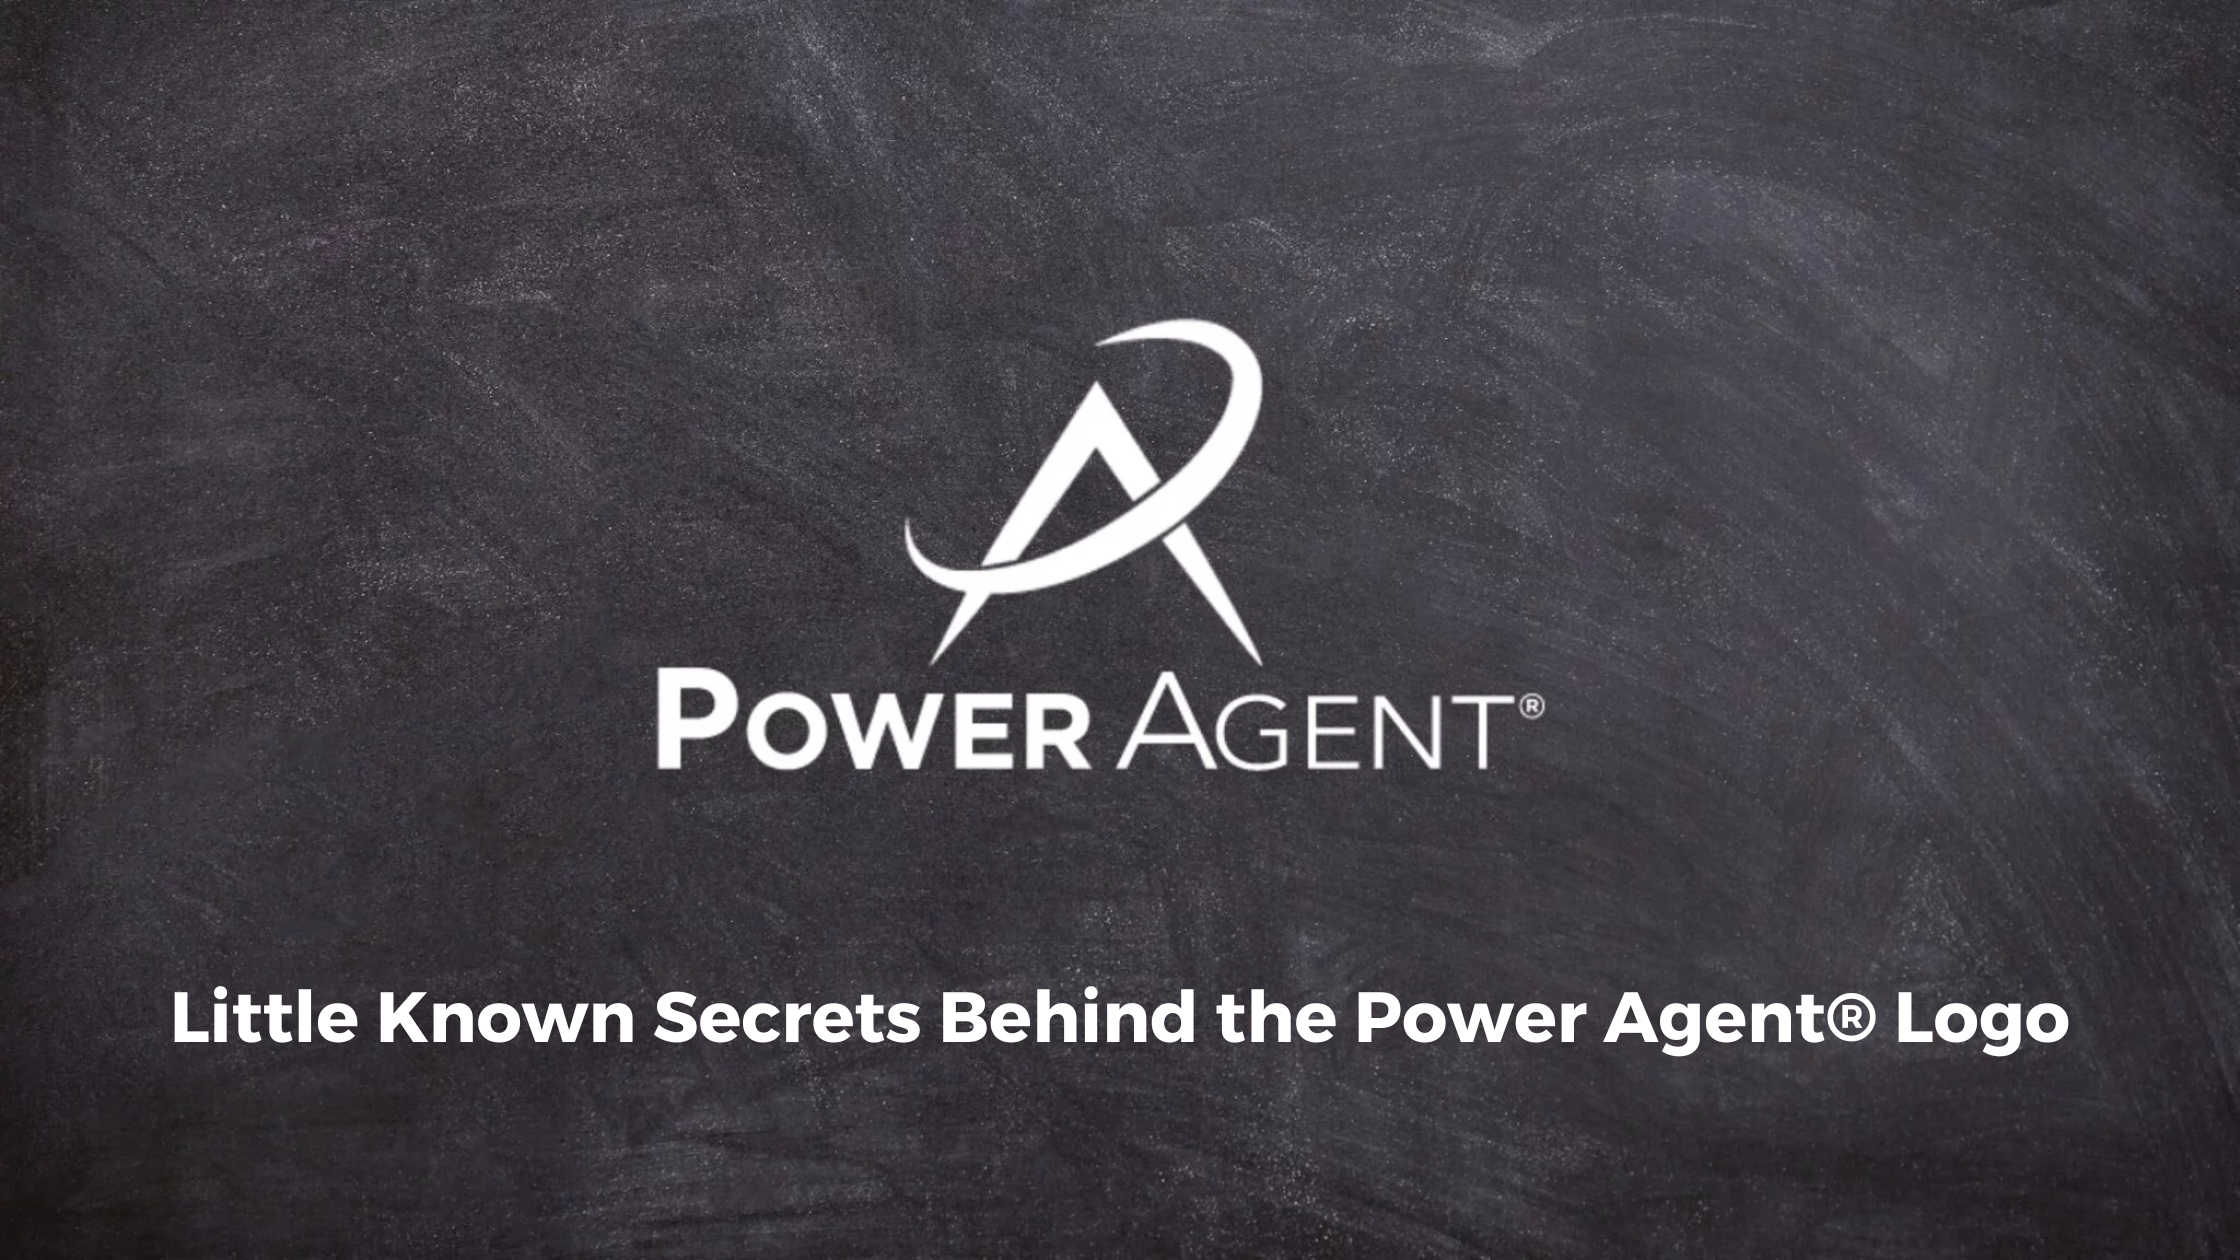 Little Known Secrets Behind the Power Agent® Logo